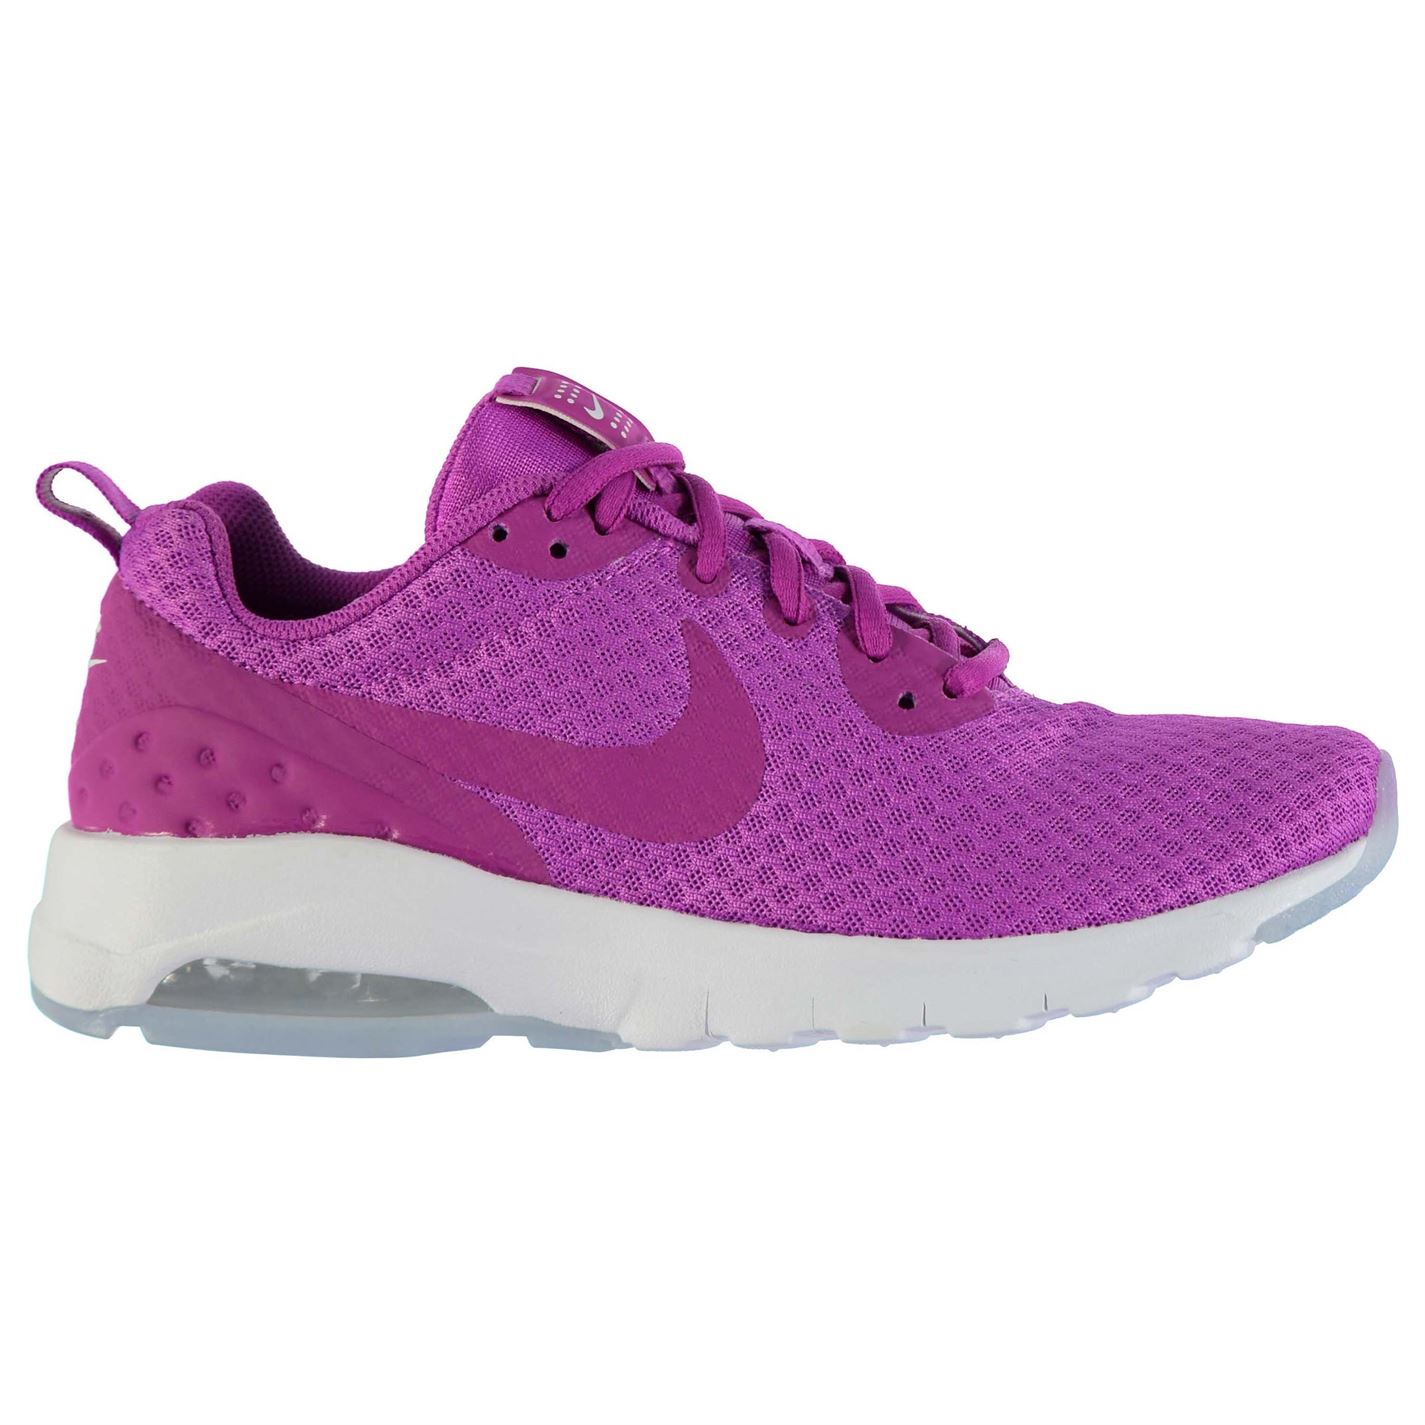 Nike Air Max Motion Lightweight Ladies Trainers